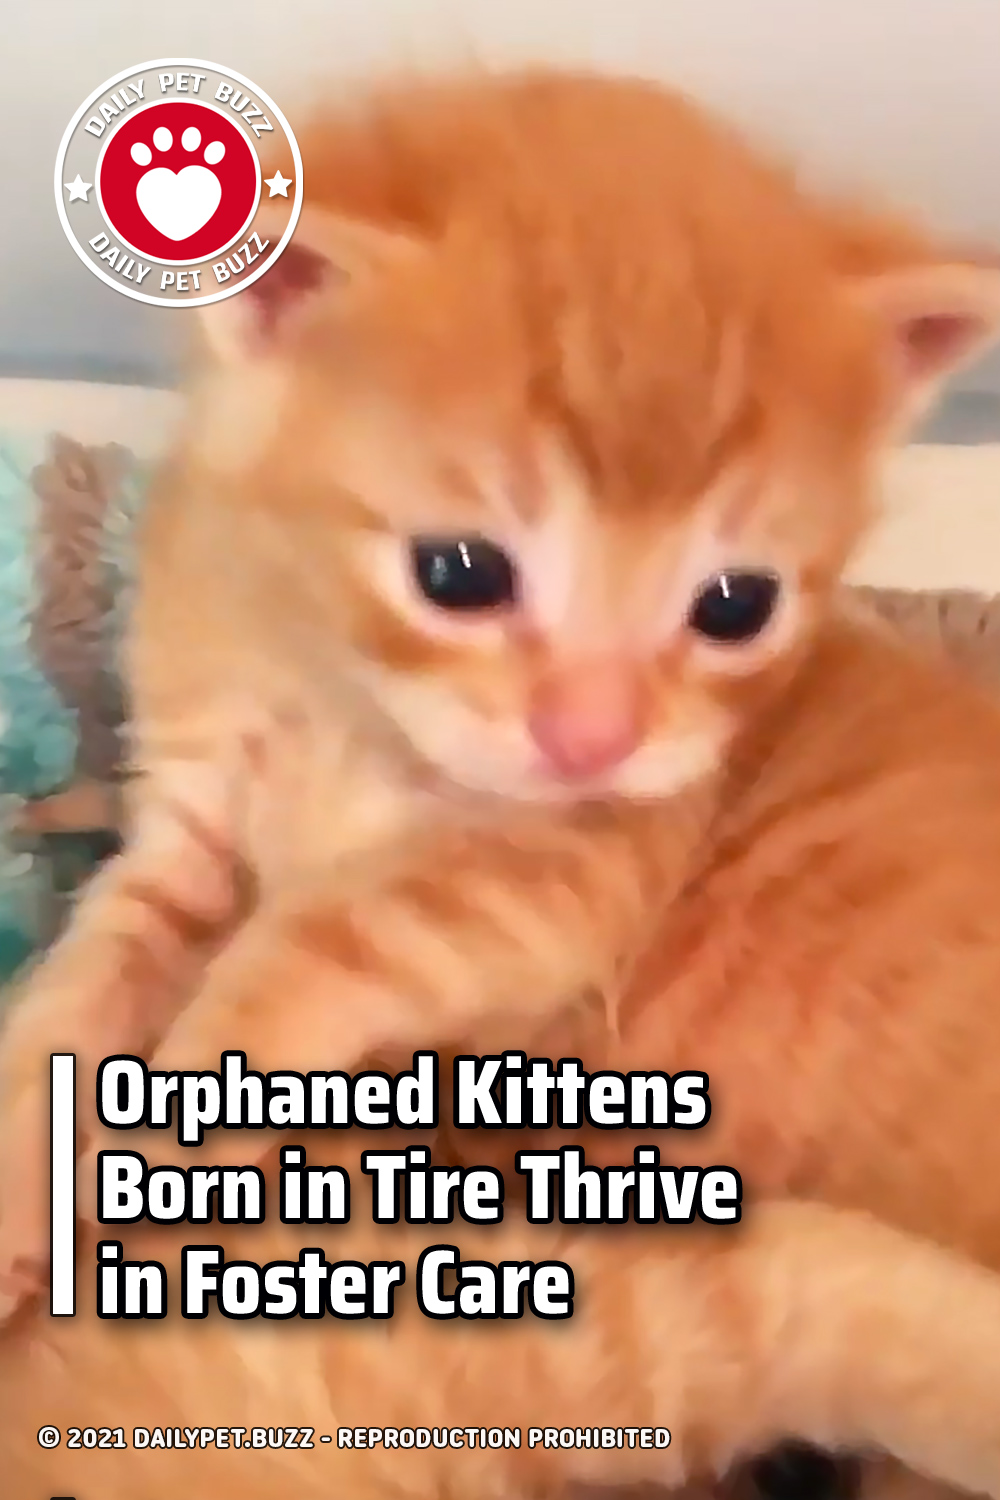 Orphaned Kittens Born in Tire Thrive in Foster Care